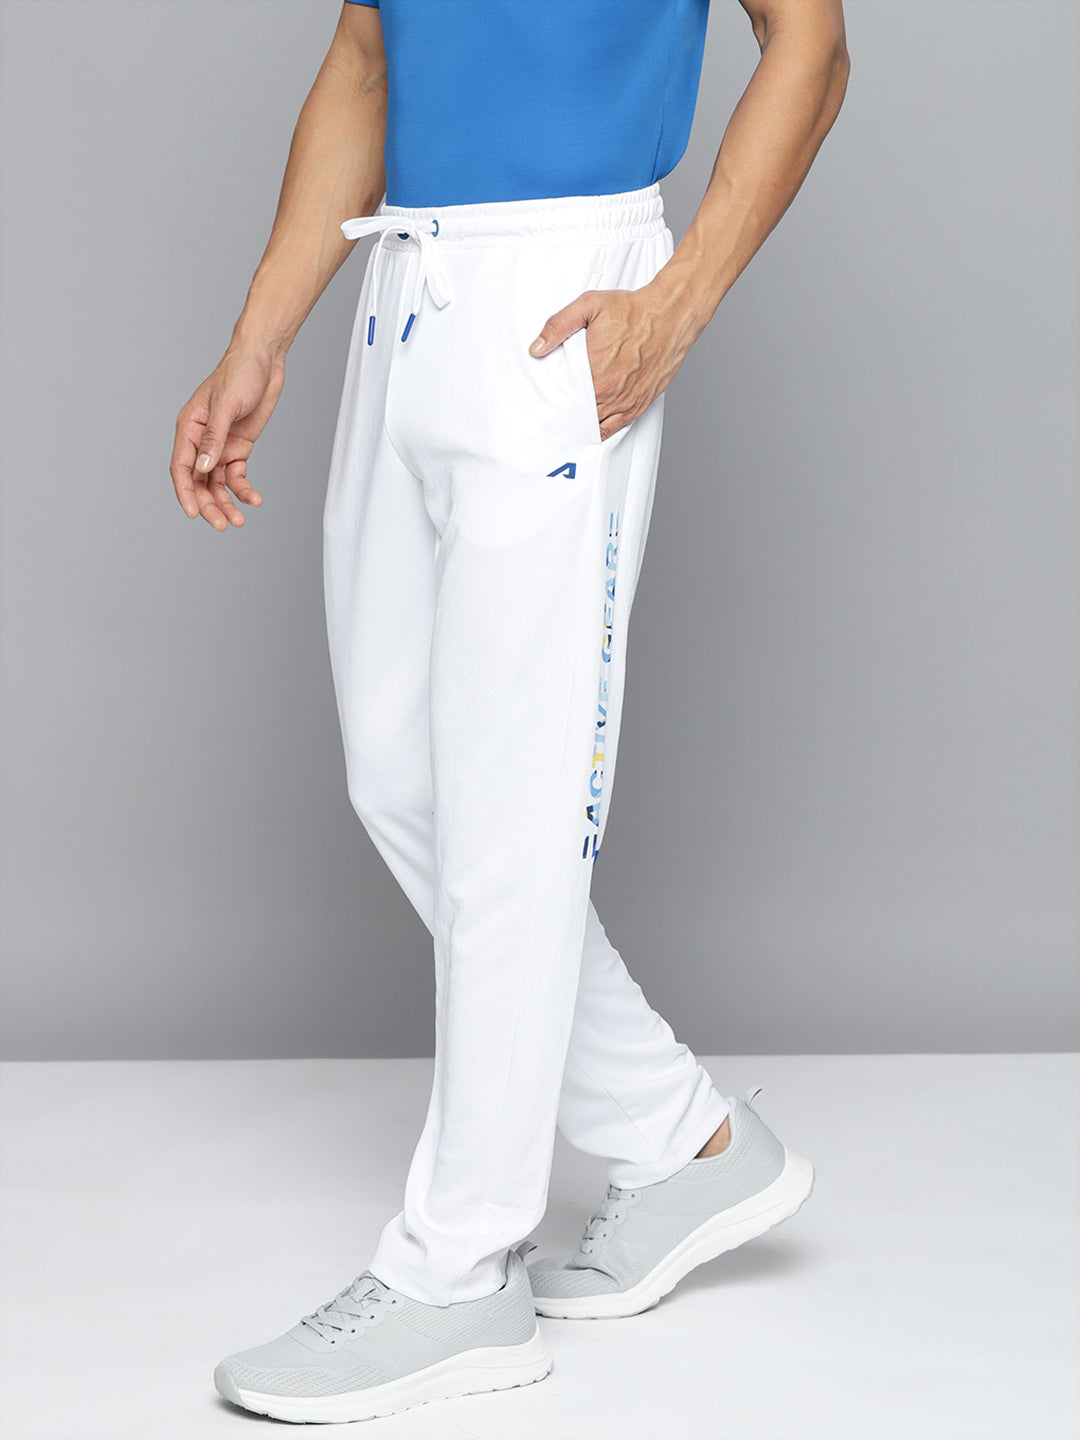 Alcis Men White Blue Solid Slim-Fit Training Track Pants with Side Taping Detail